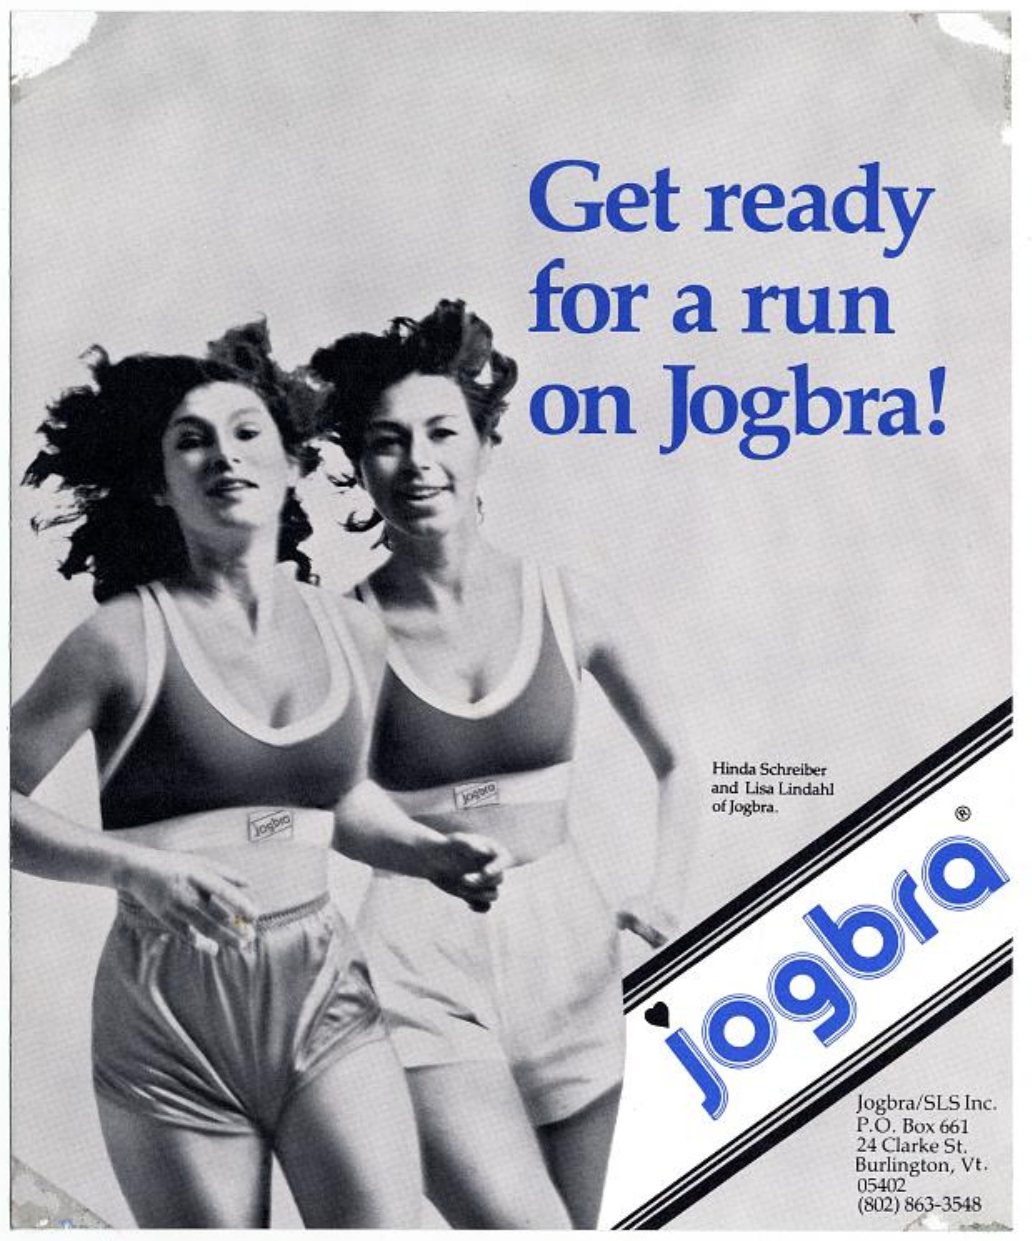 Midnight Magic on X: It's Fun Fact Friday! Let's talk Sports Bras 🏃‍♀️  Lisa Lindahl, Hinda Miller and Polly Smith invented the first general sports  bra in 1977 : the Jockbra. It